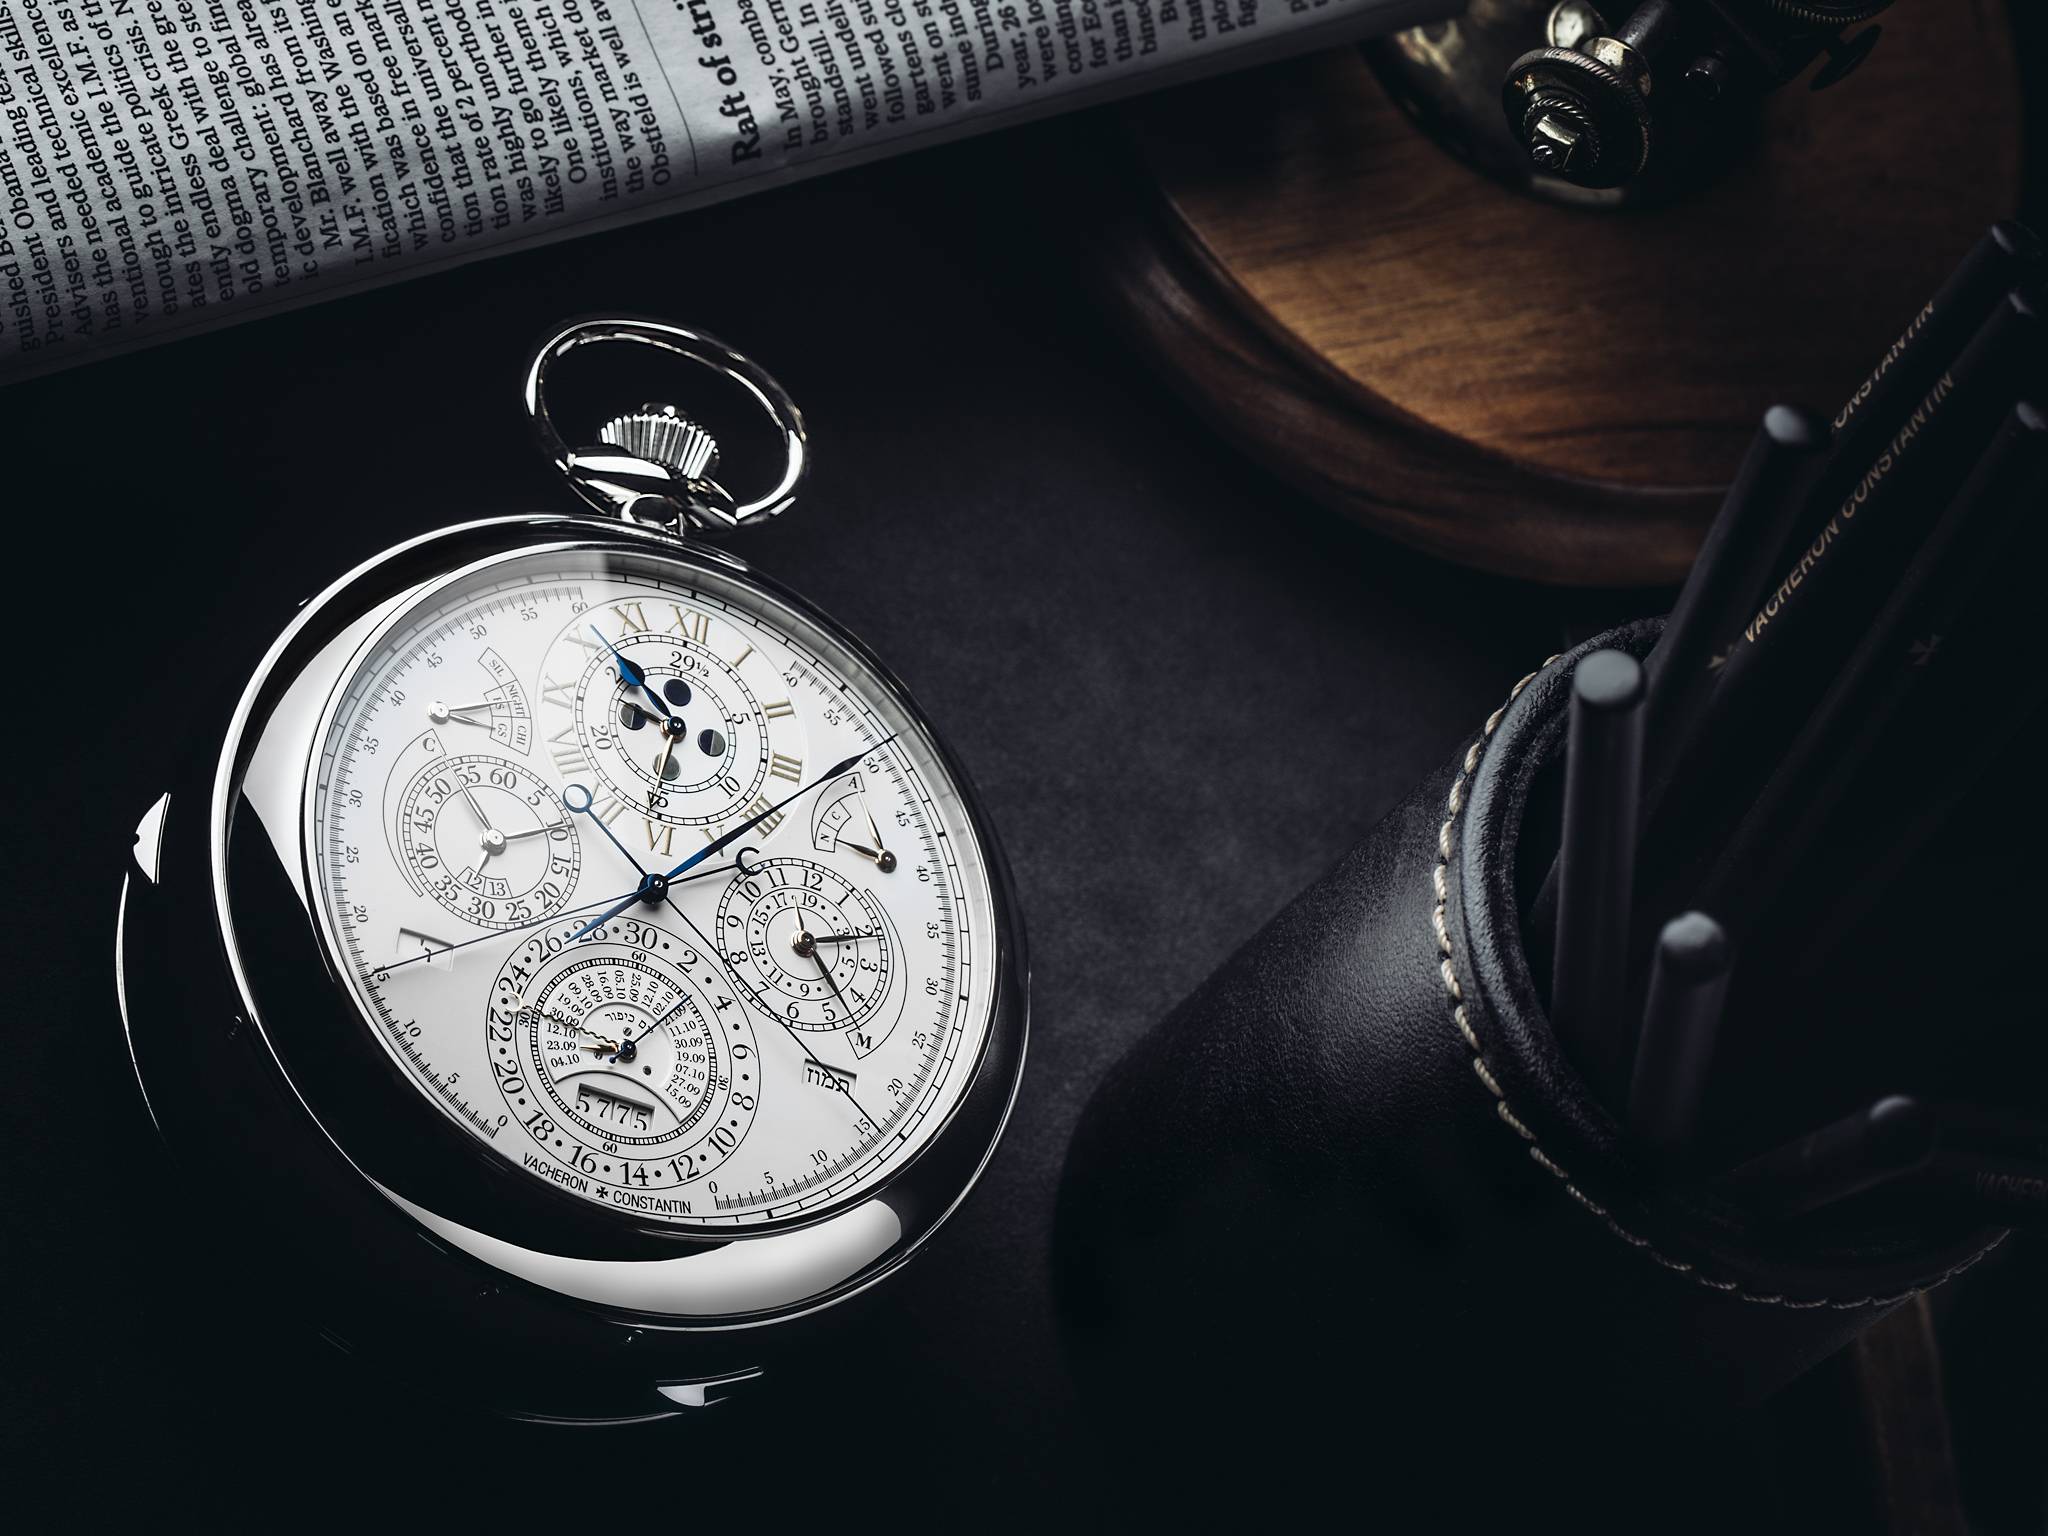 Vacheron Constantin Reference 57260 The Most Complicated watch ever Pocket Watch 260th Anniversary